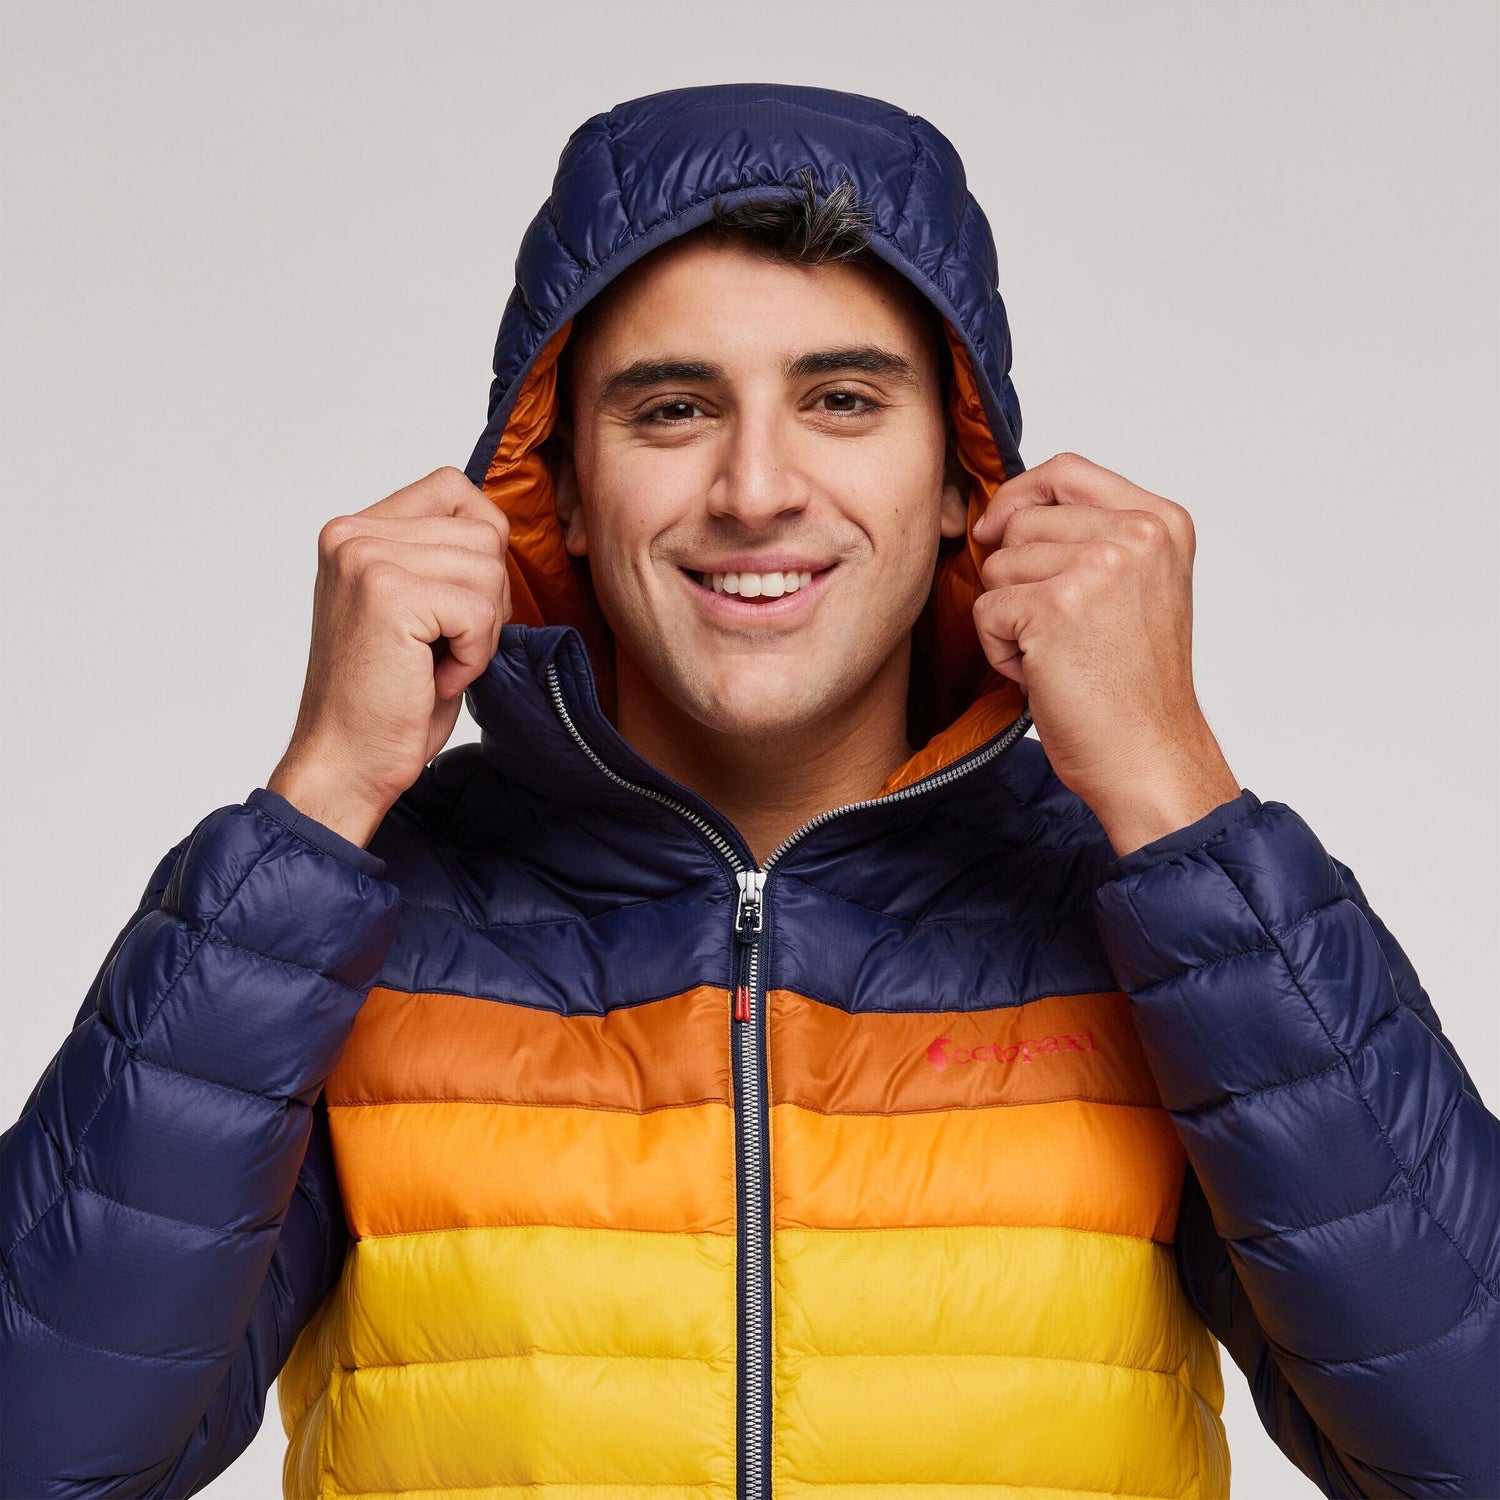 Cotopaxi - M's Fuego Down Hooded Jacket - Responsibly sourced down - Weekendbee - sustainable sportswear